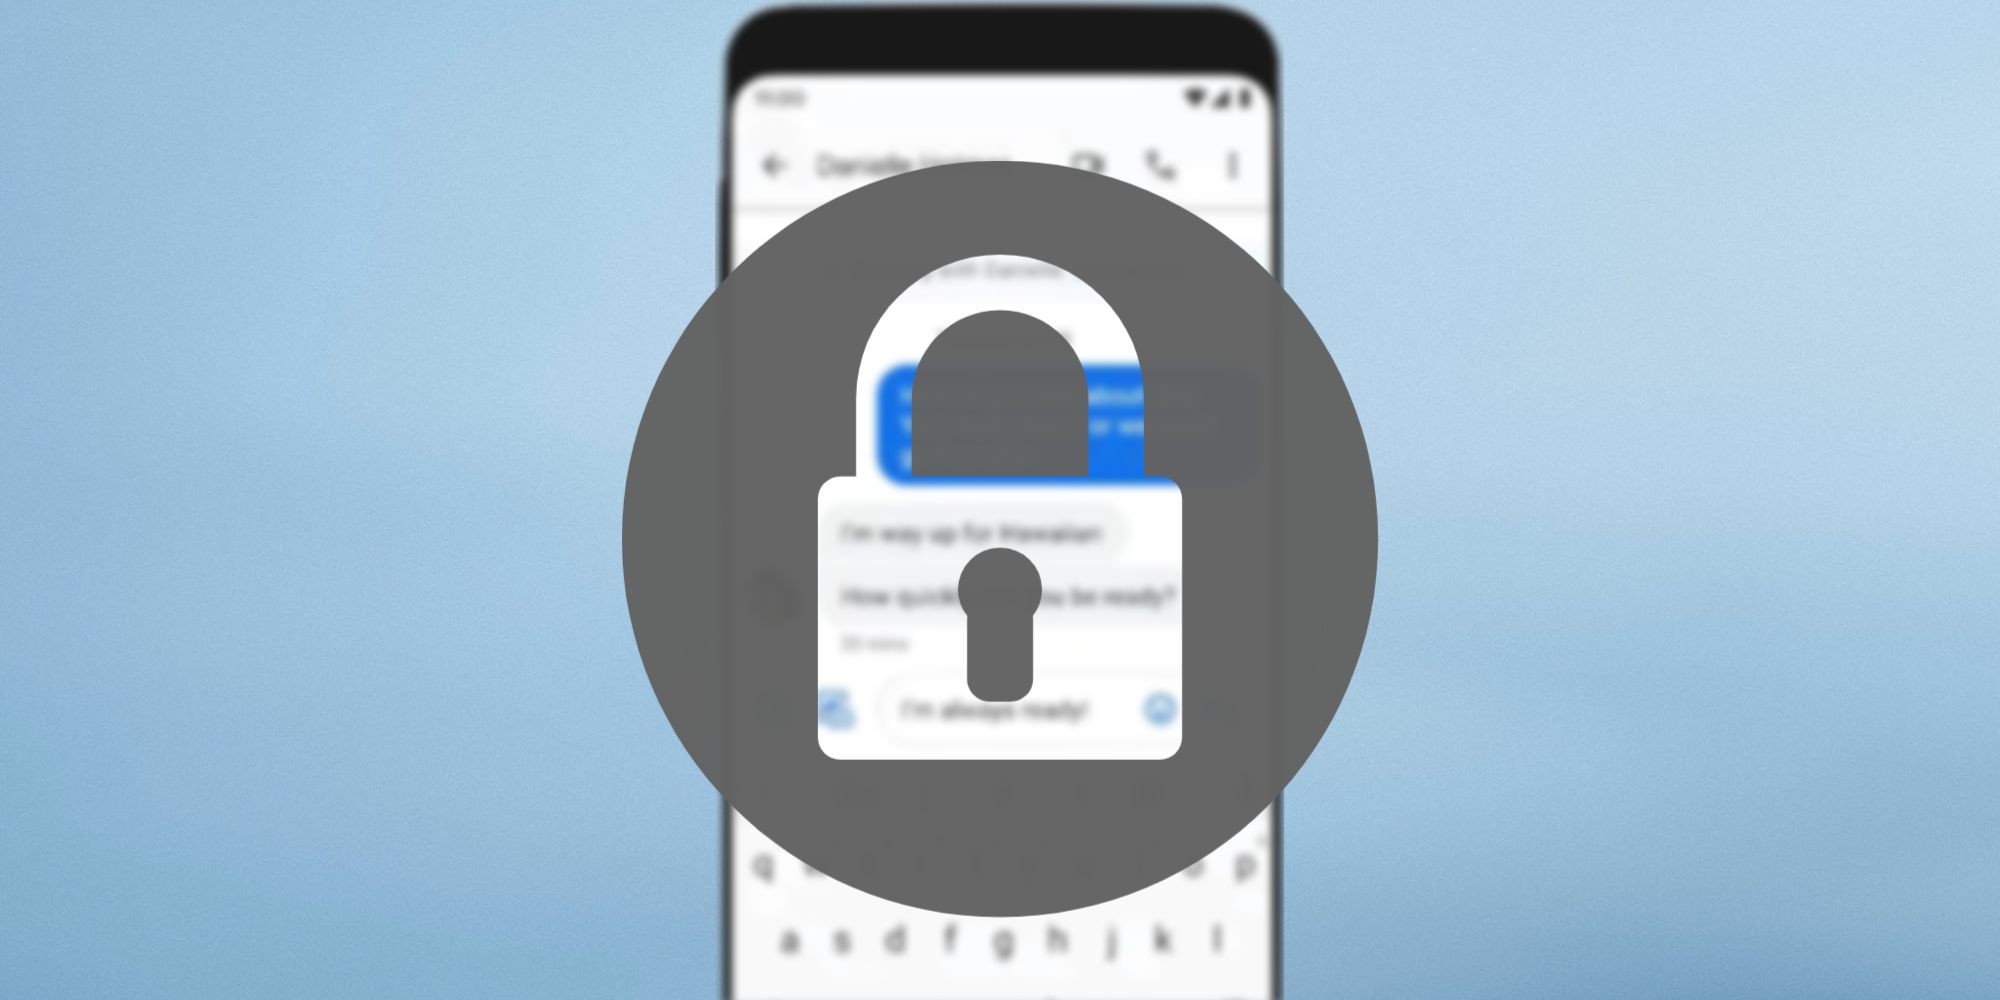 Padlock icon with 'Not Secure' message